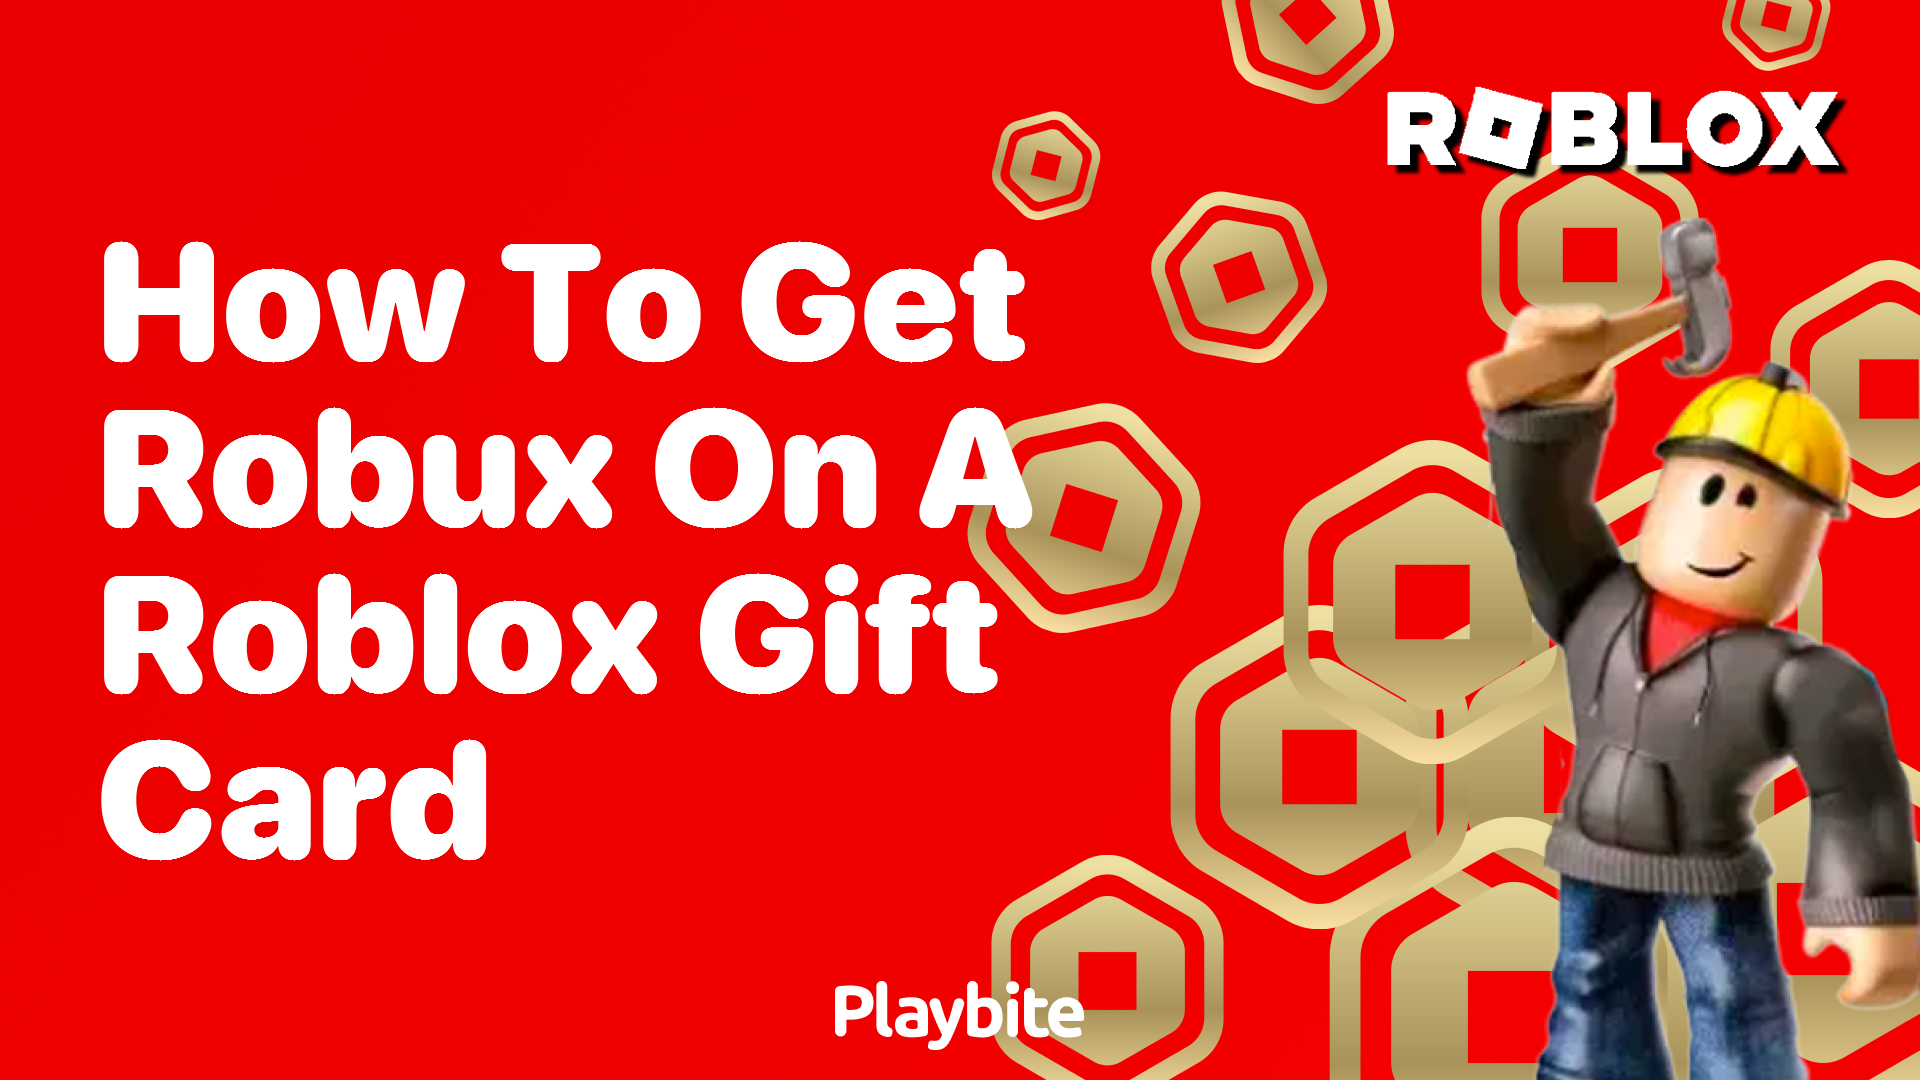 How to Get Robux on a Roblox Gift Card